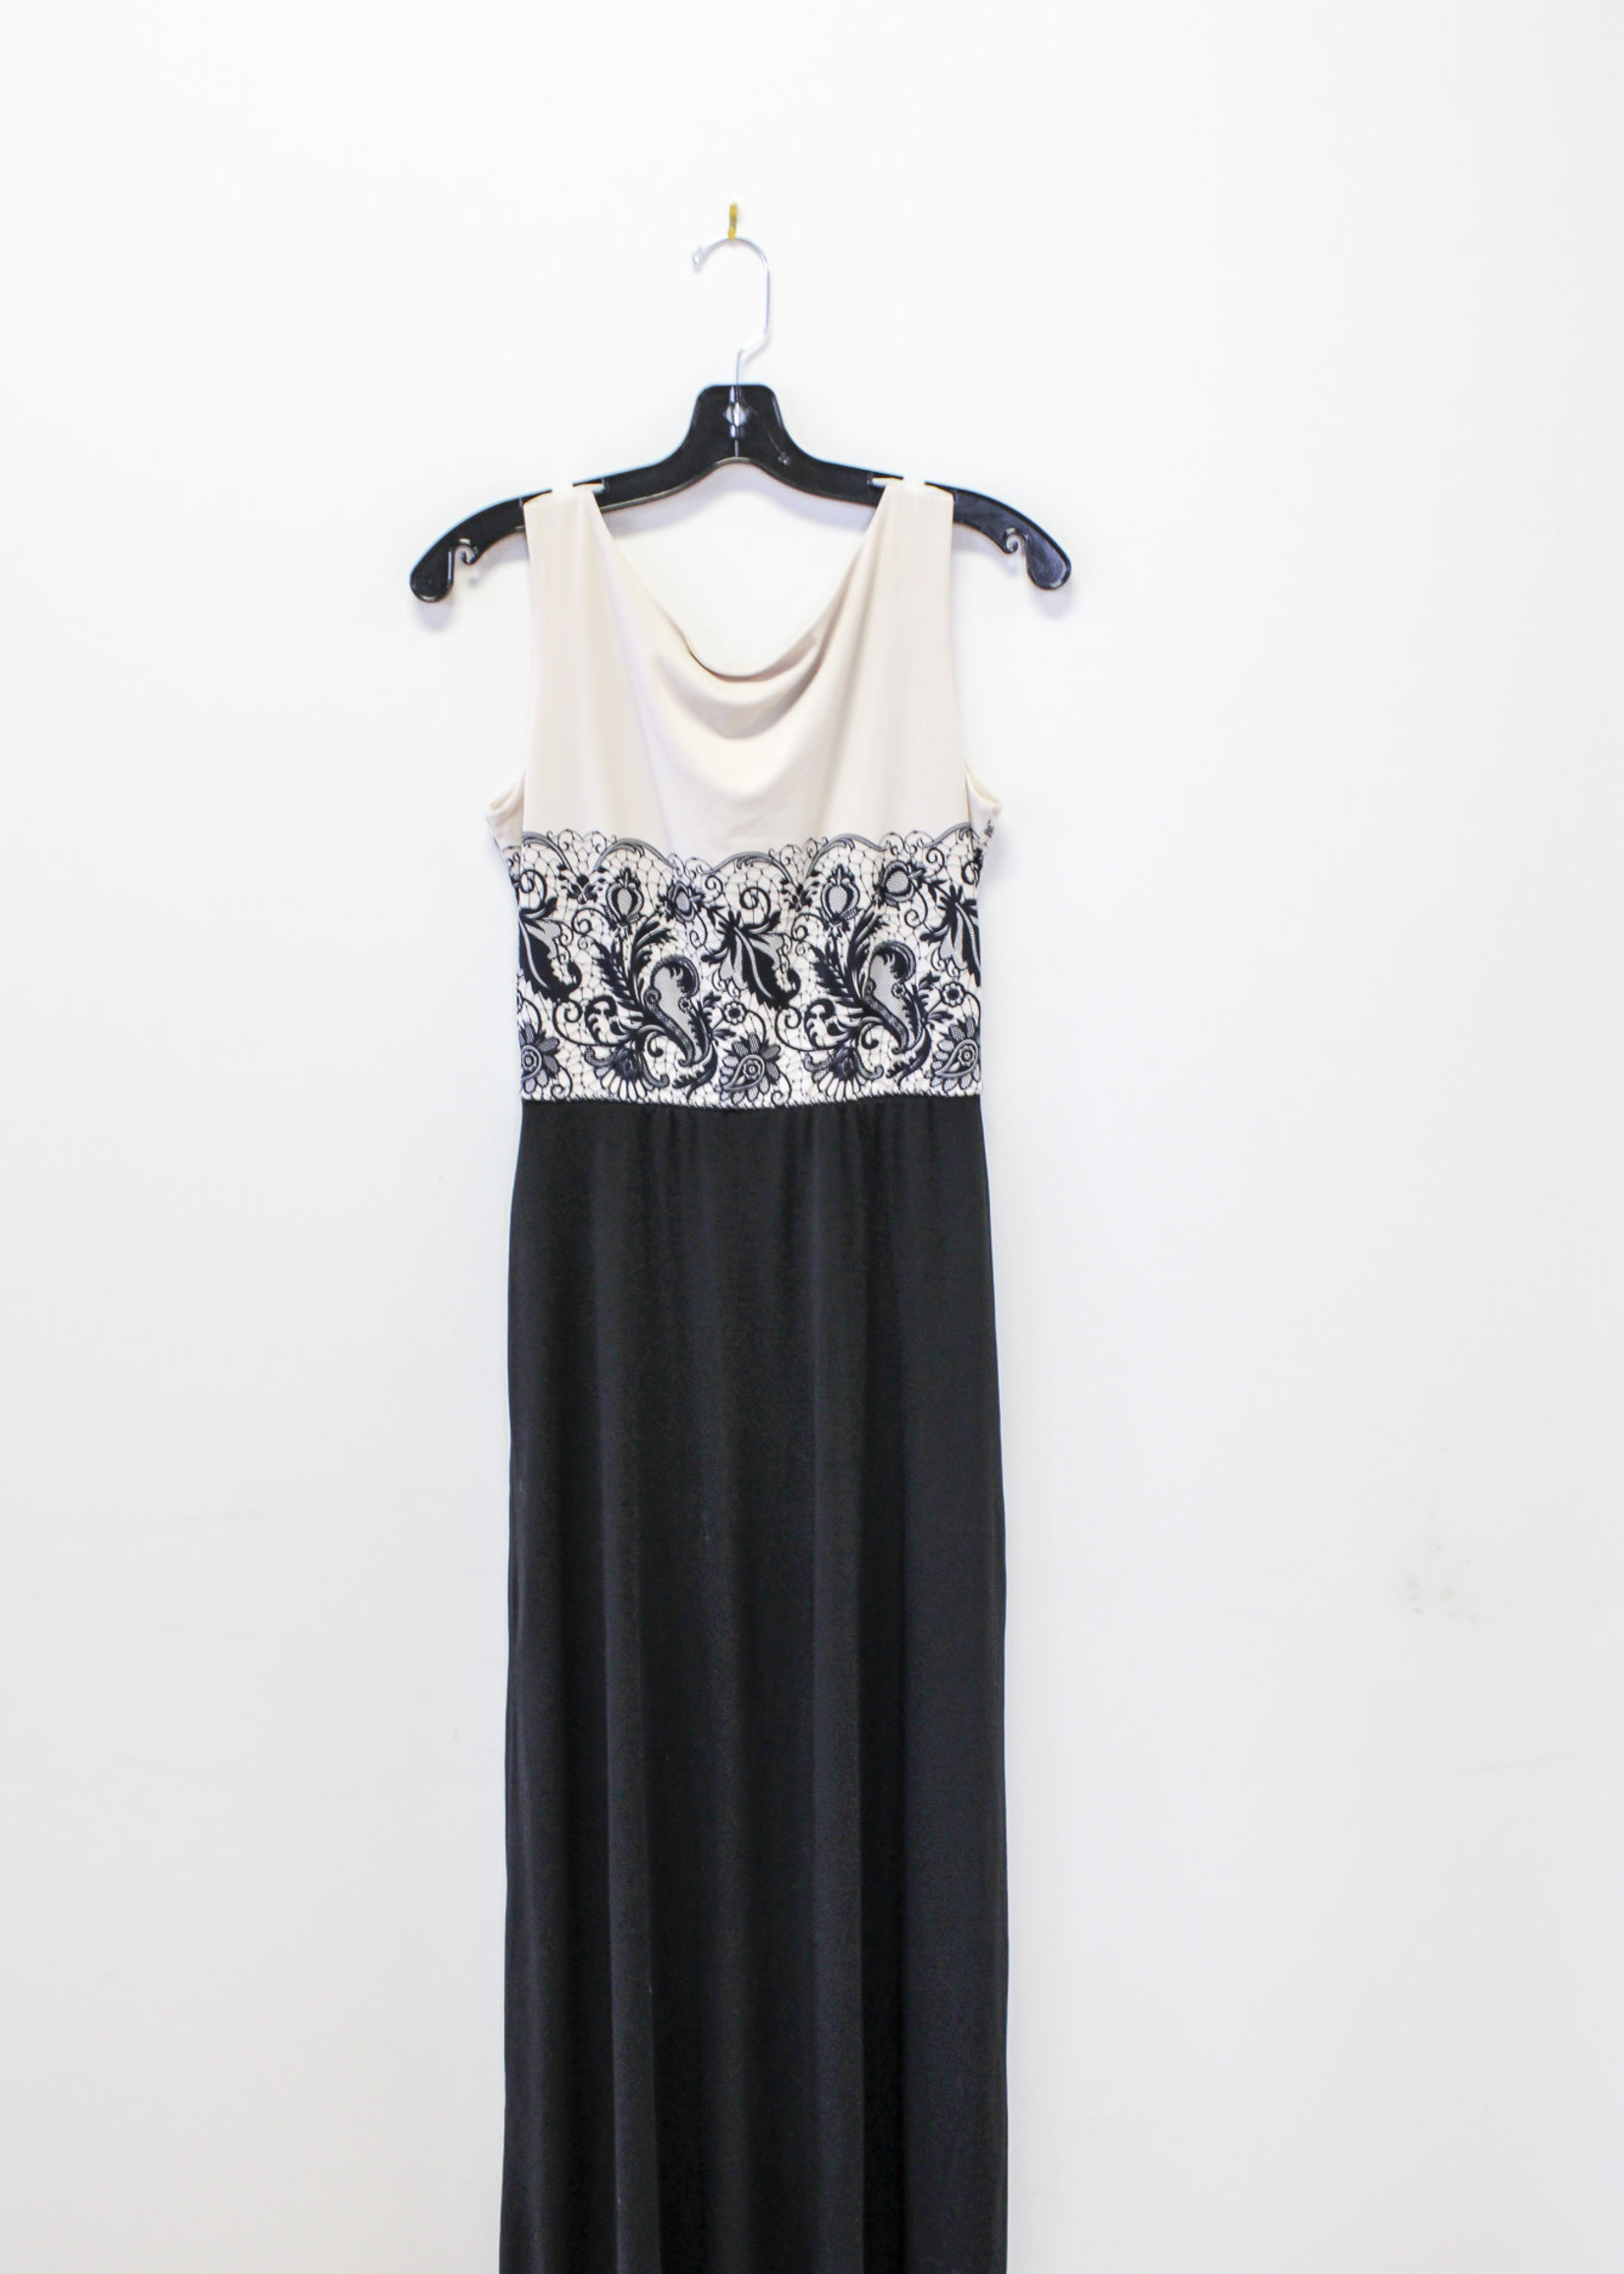 DRESS-Long Black and Cream with Lace print (L)